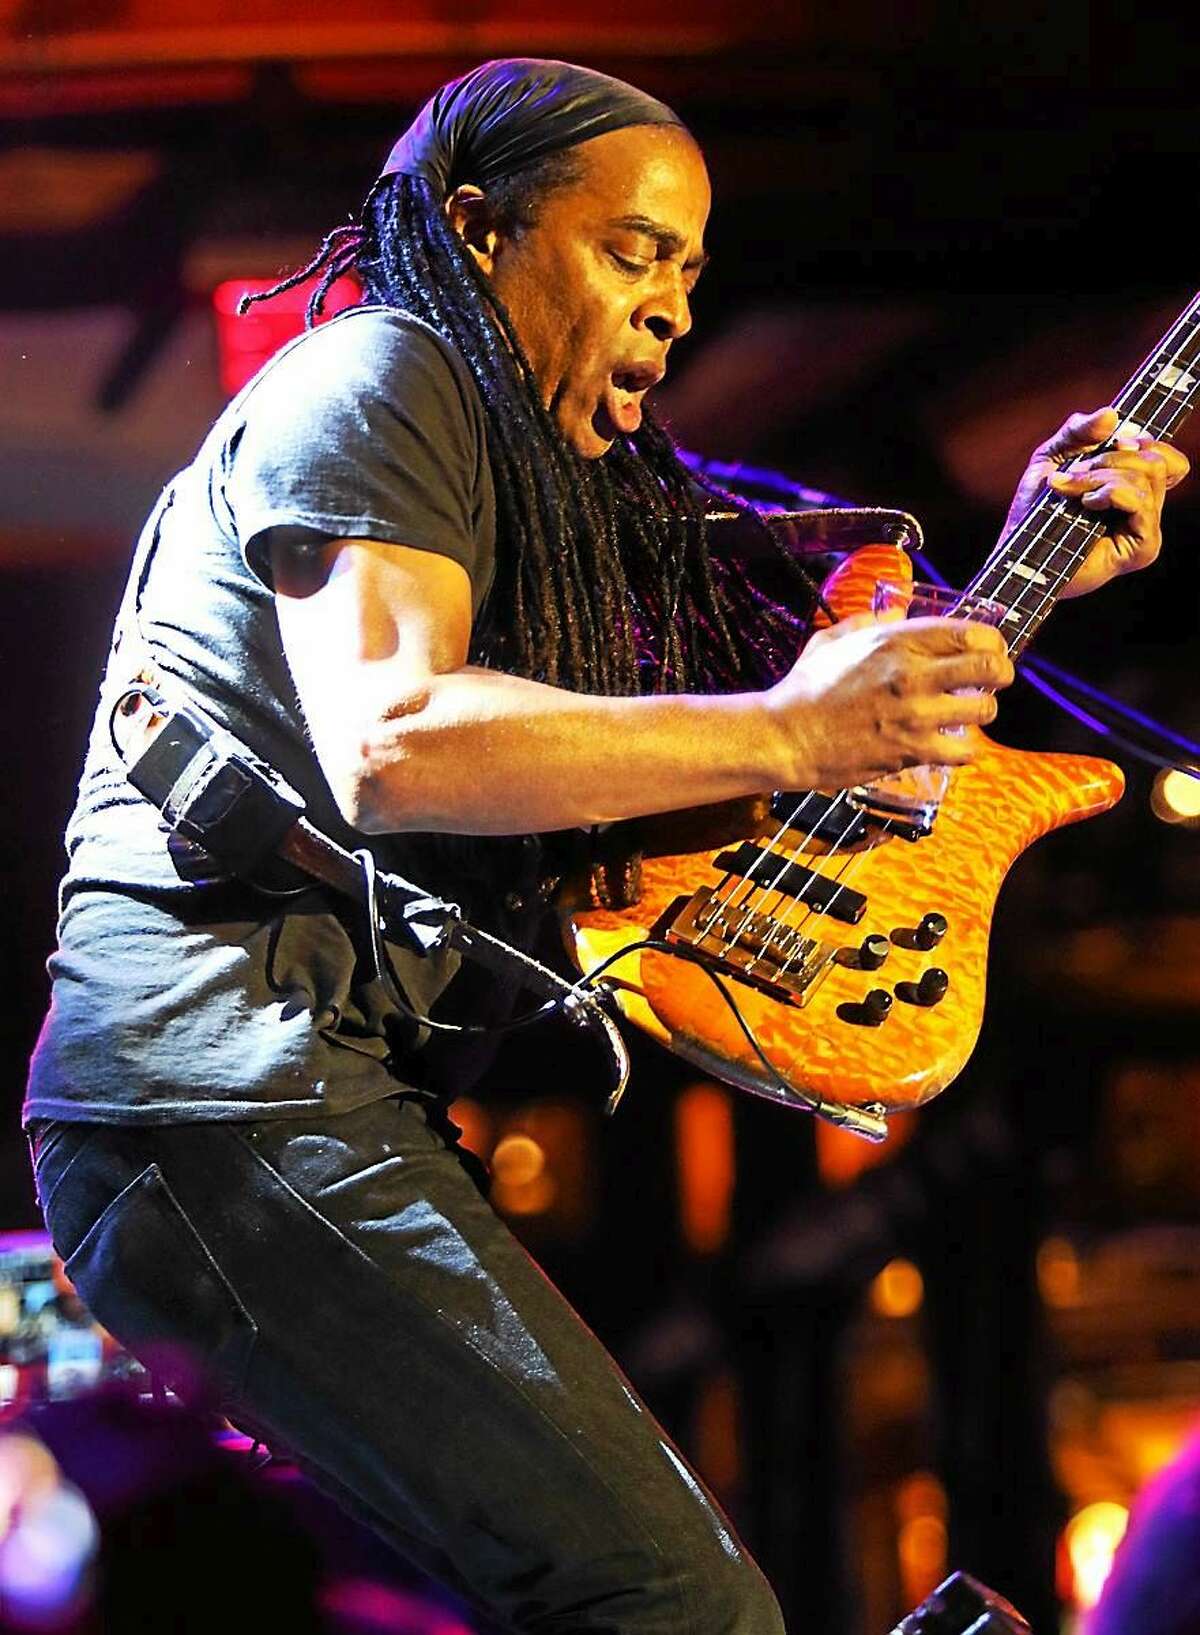 Photo by John Atashian Living Colour bassist Doug Wimbish, a Bloomfield native, is shown soloing on stage at the Wolf Den Lounge during the bands concert performance at the Mohegan Sun Casino in Uncasville on Friday July 3. The hard rock band from New York City are on a U.S. tour in support of their brand new CD, ìShade.î